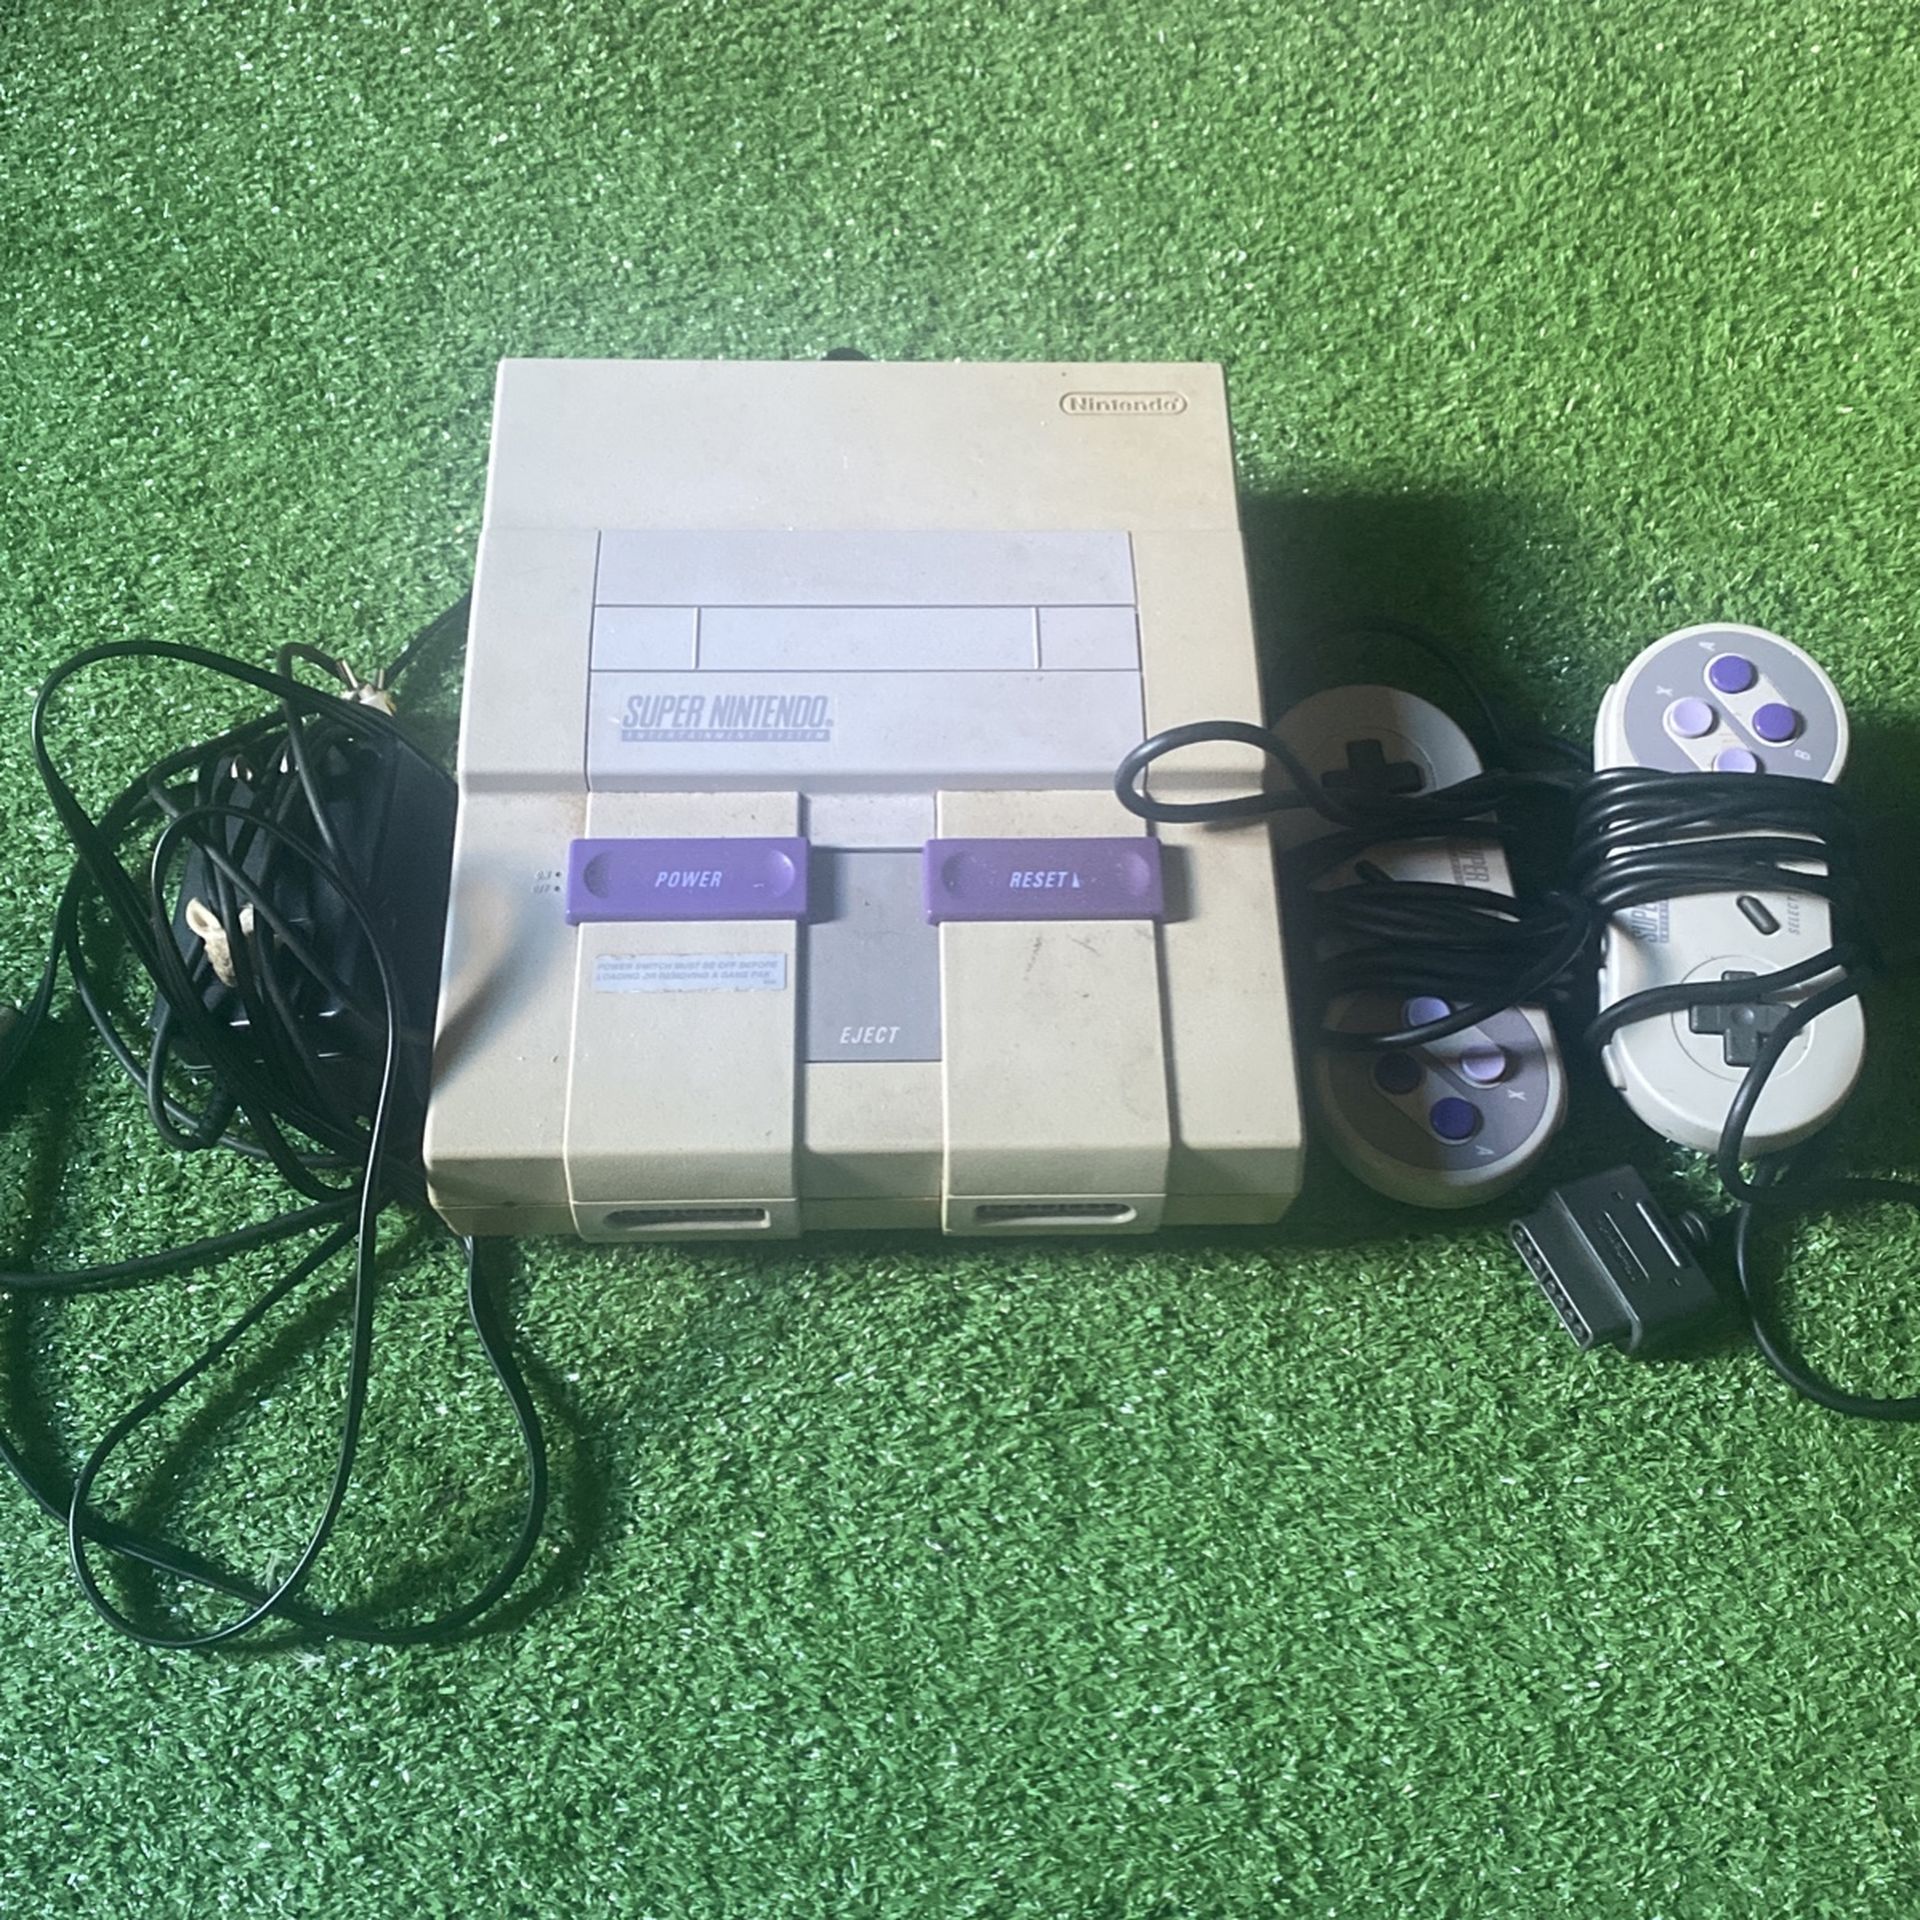 Super Nintendo ( With Cords And Controllers )